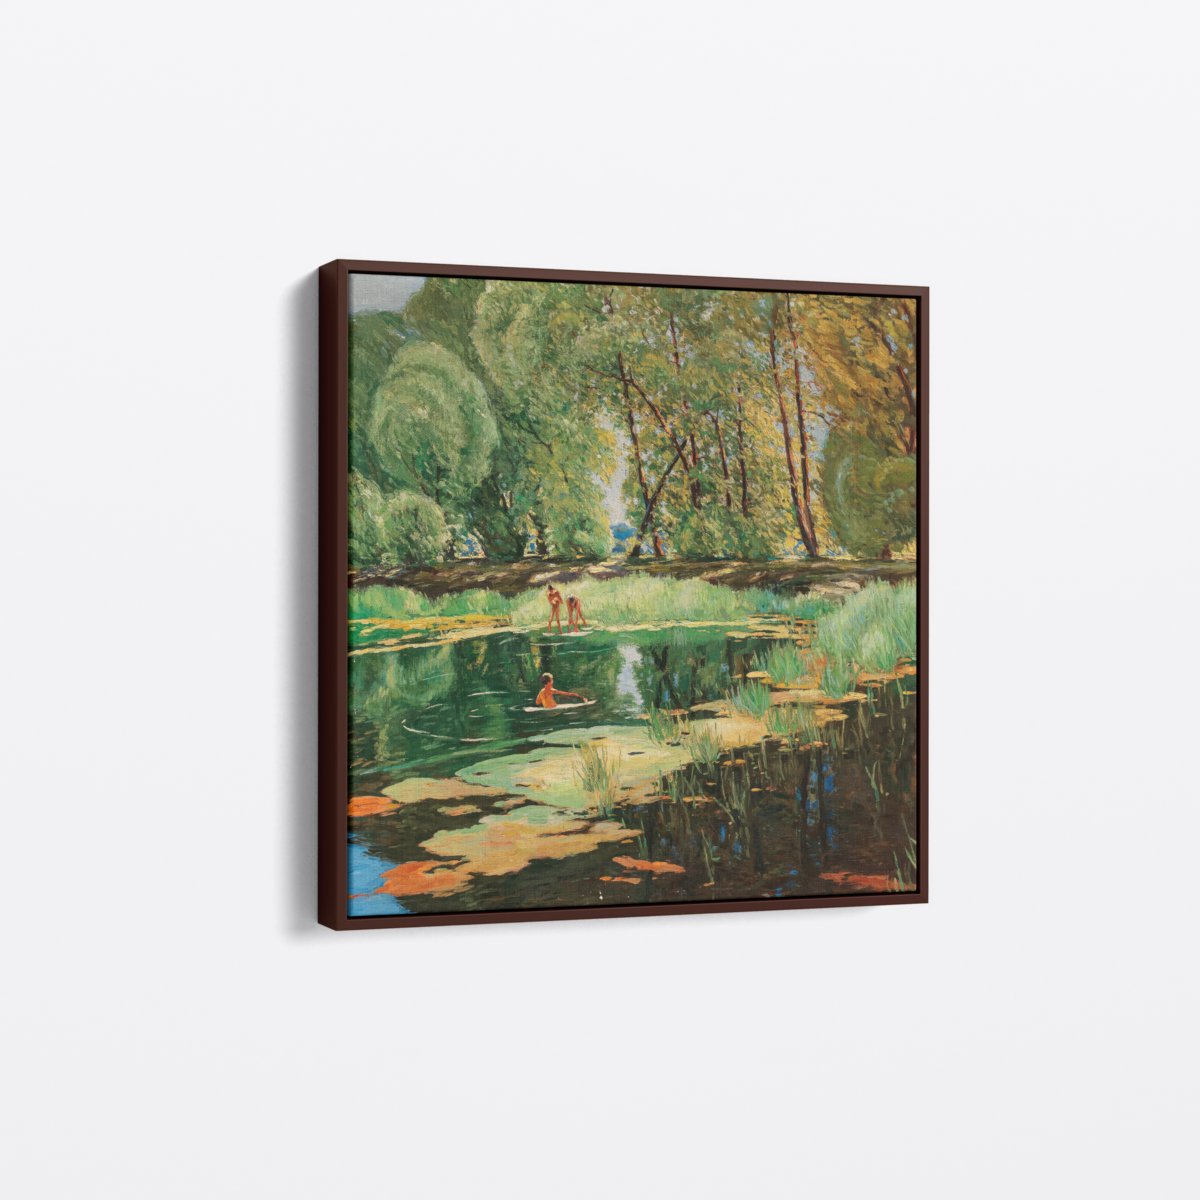 Playing in the Pond | August Rieger | Ave Legato | Canvas Art Prints | Vintage Artwork